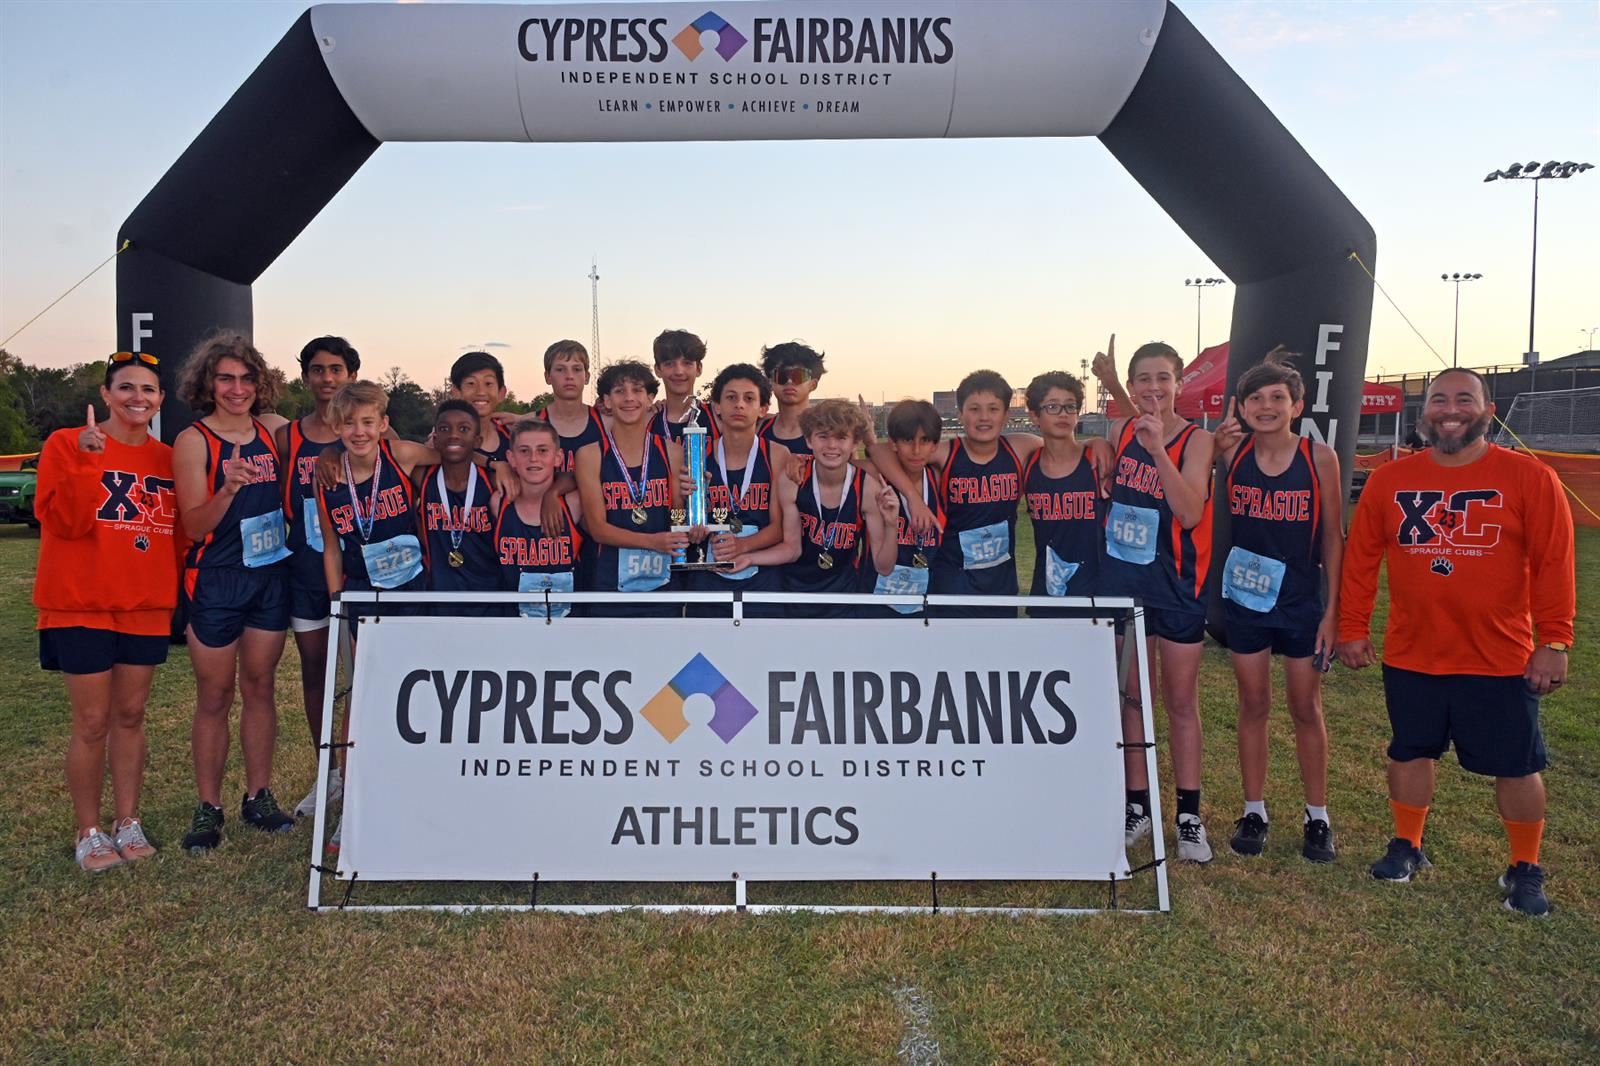 Three different schools won team championships at the CFISD Middle School Cross Country Meet.